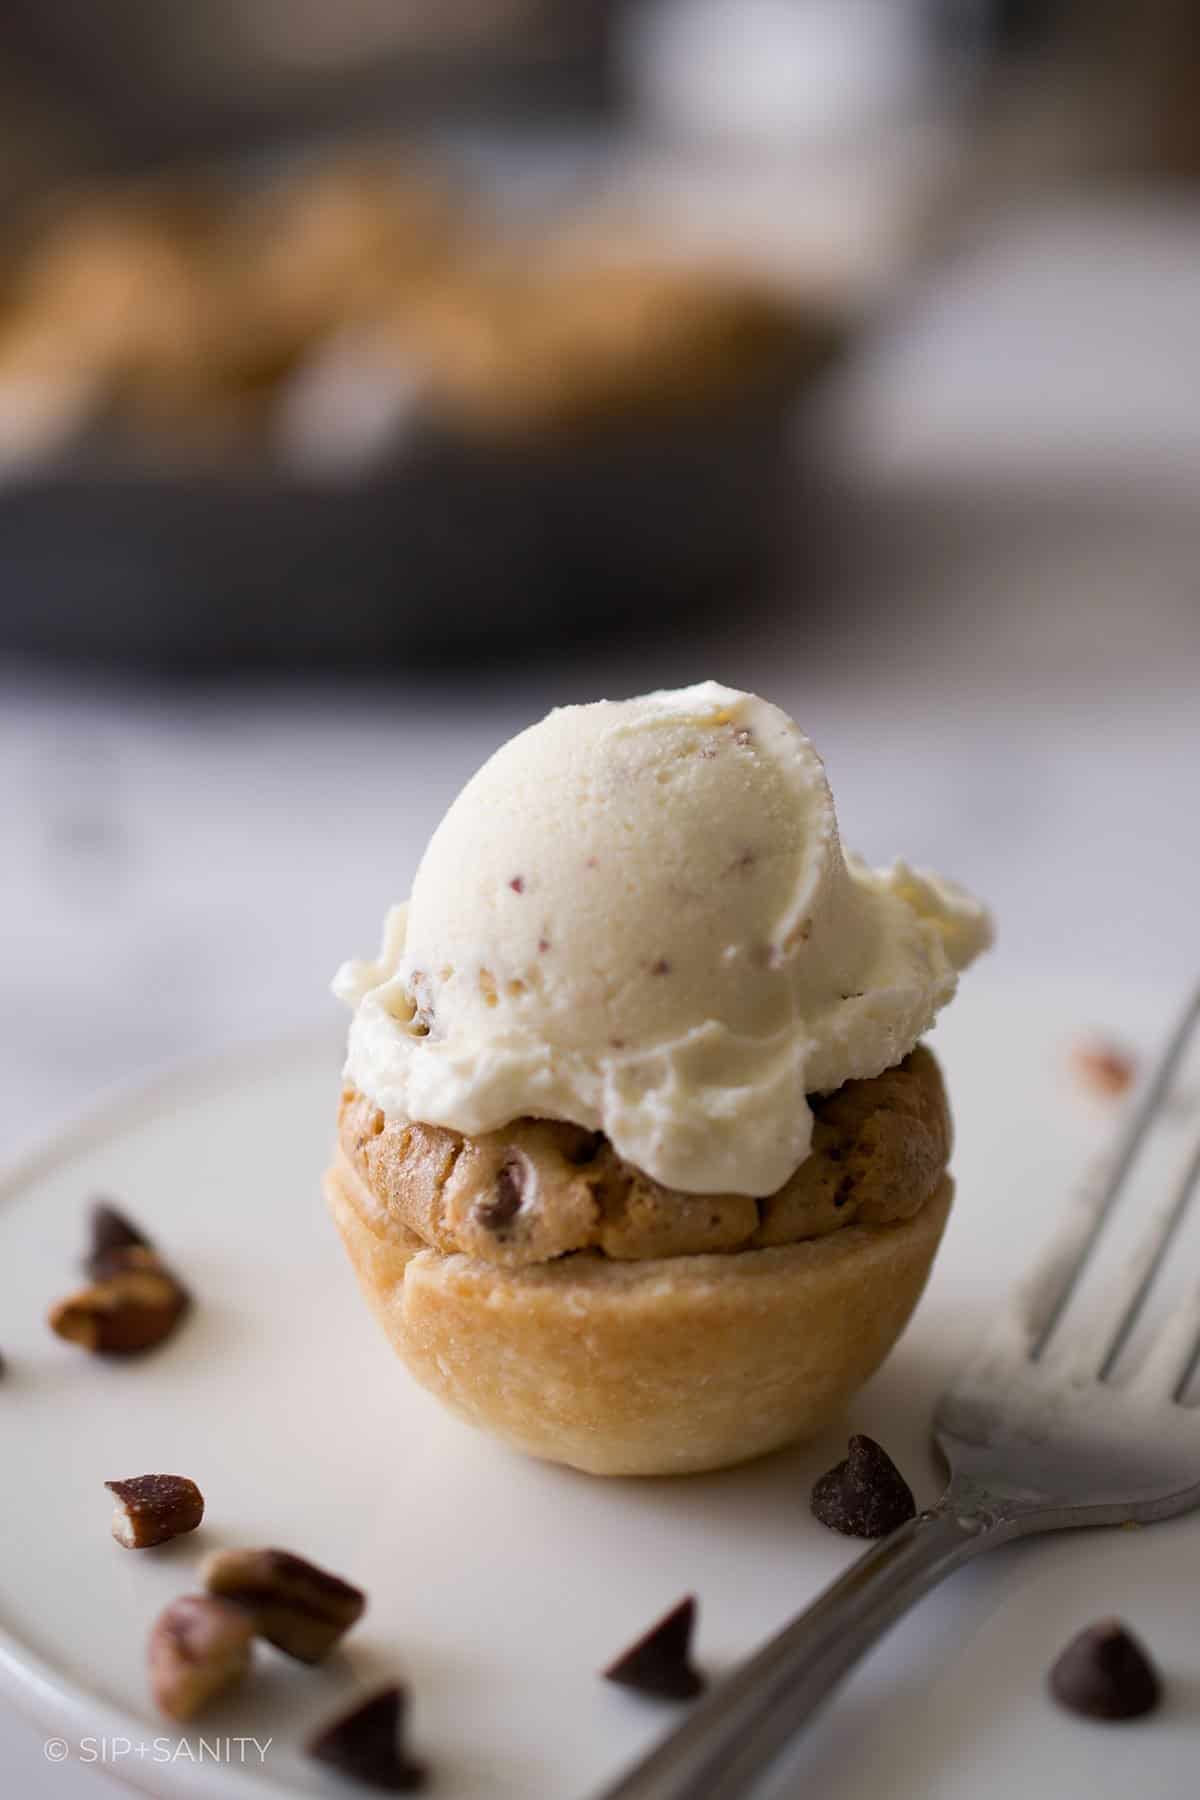 A derby pie tartlet with a tiny scoop of ice cream on top next to a fork.